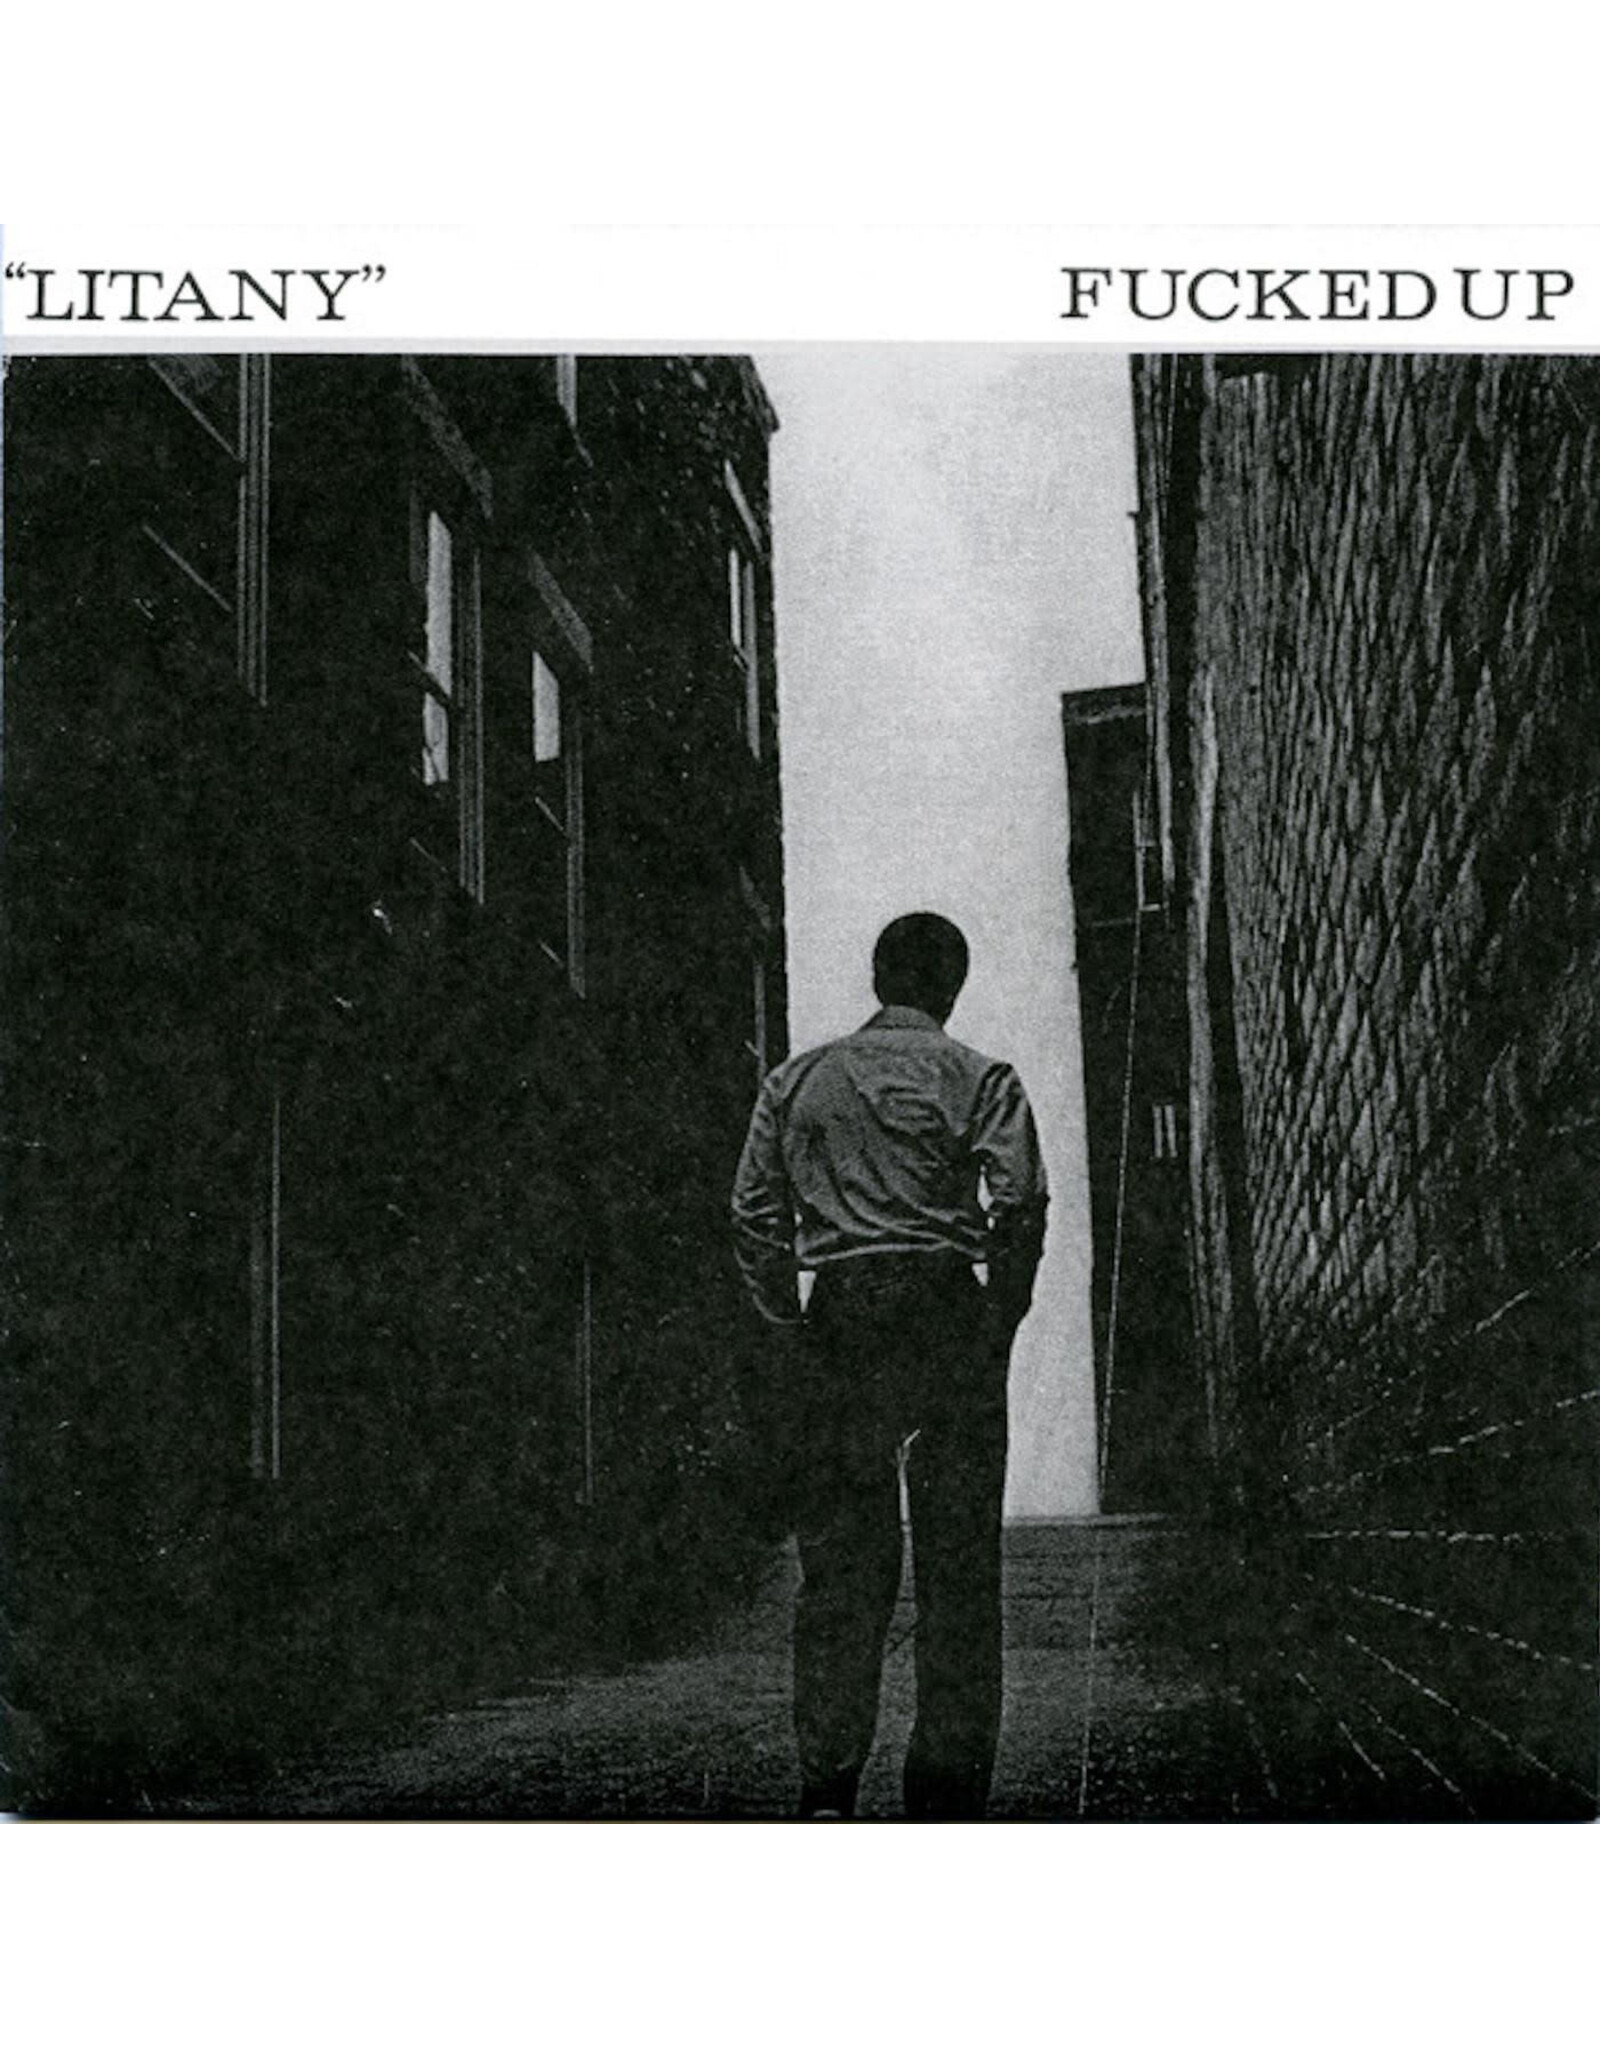 Self Release Fucked Up: Litany LP